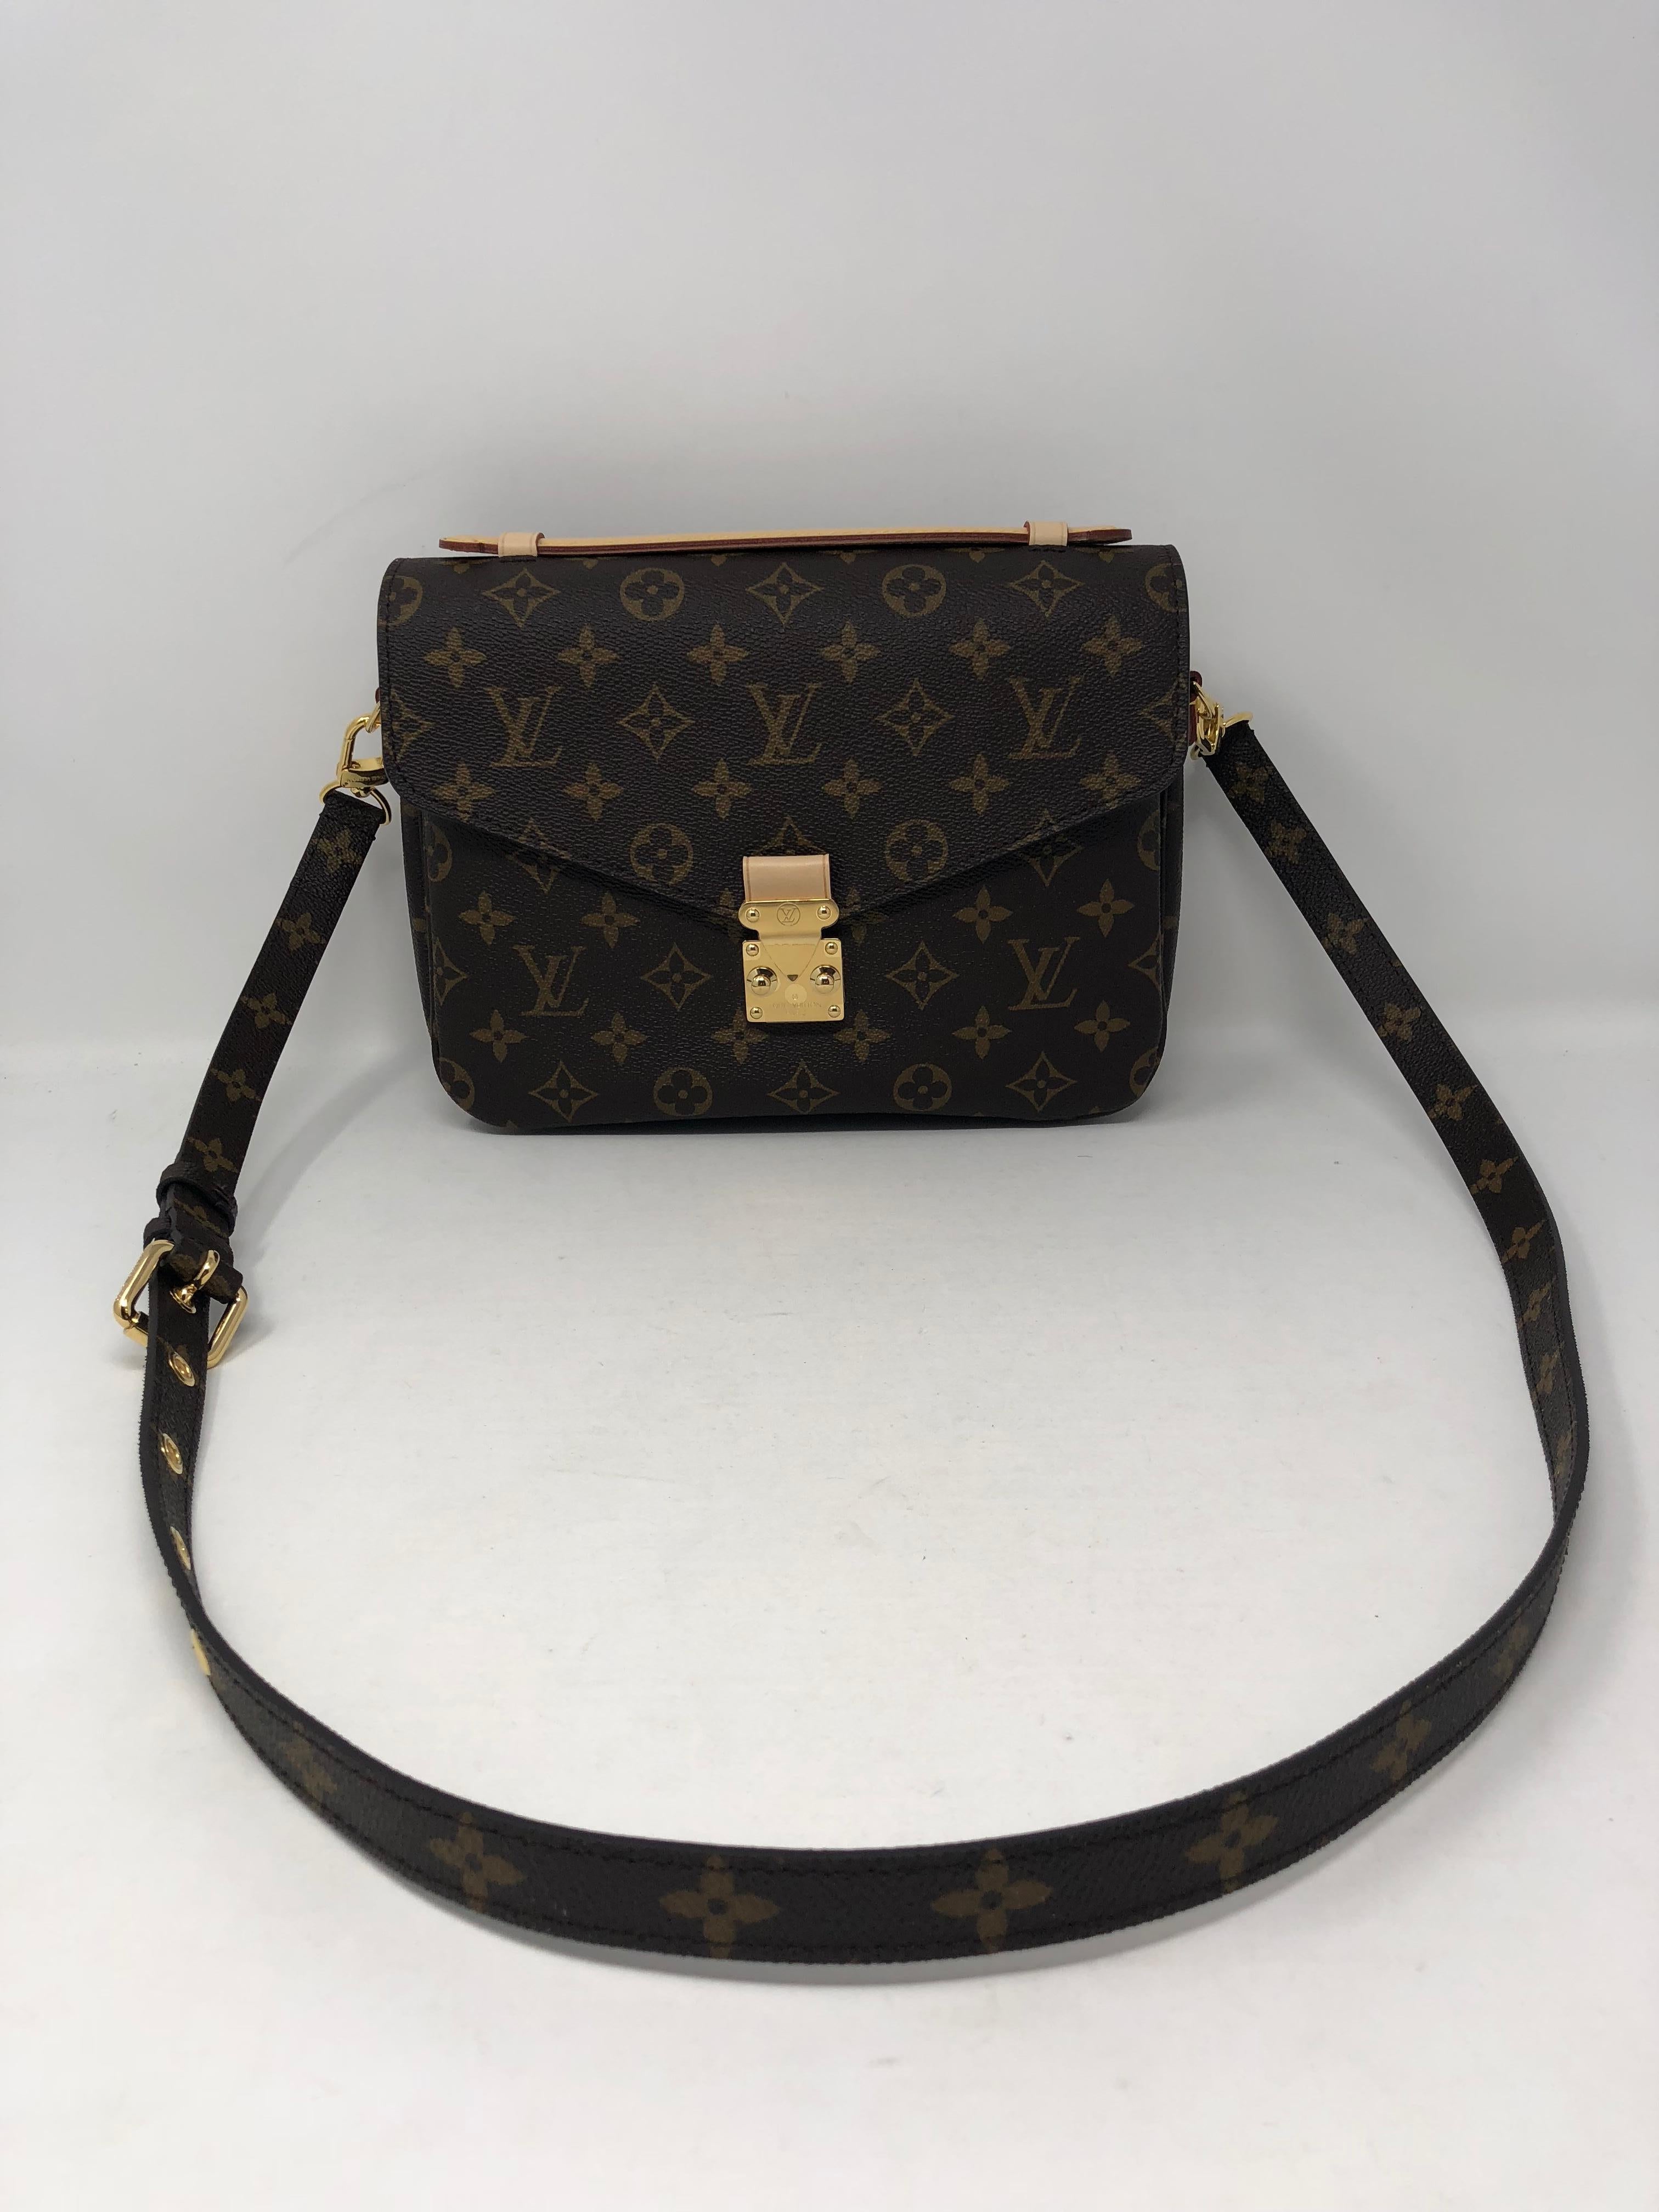 Louis Vuitton Pochette Metis in monogram crossbody. The strap is detachable. Sold out and Brand New. Very limited. Discontinued bag. It's the perfect bag for everyday use. 